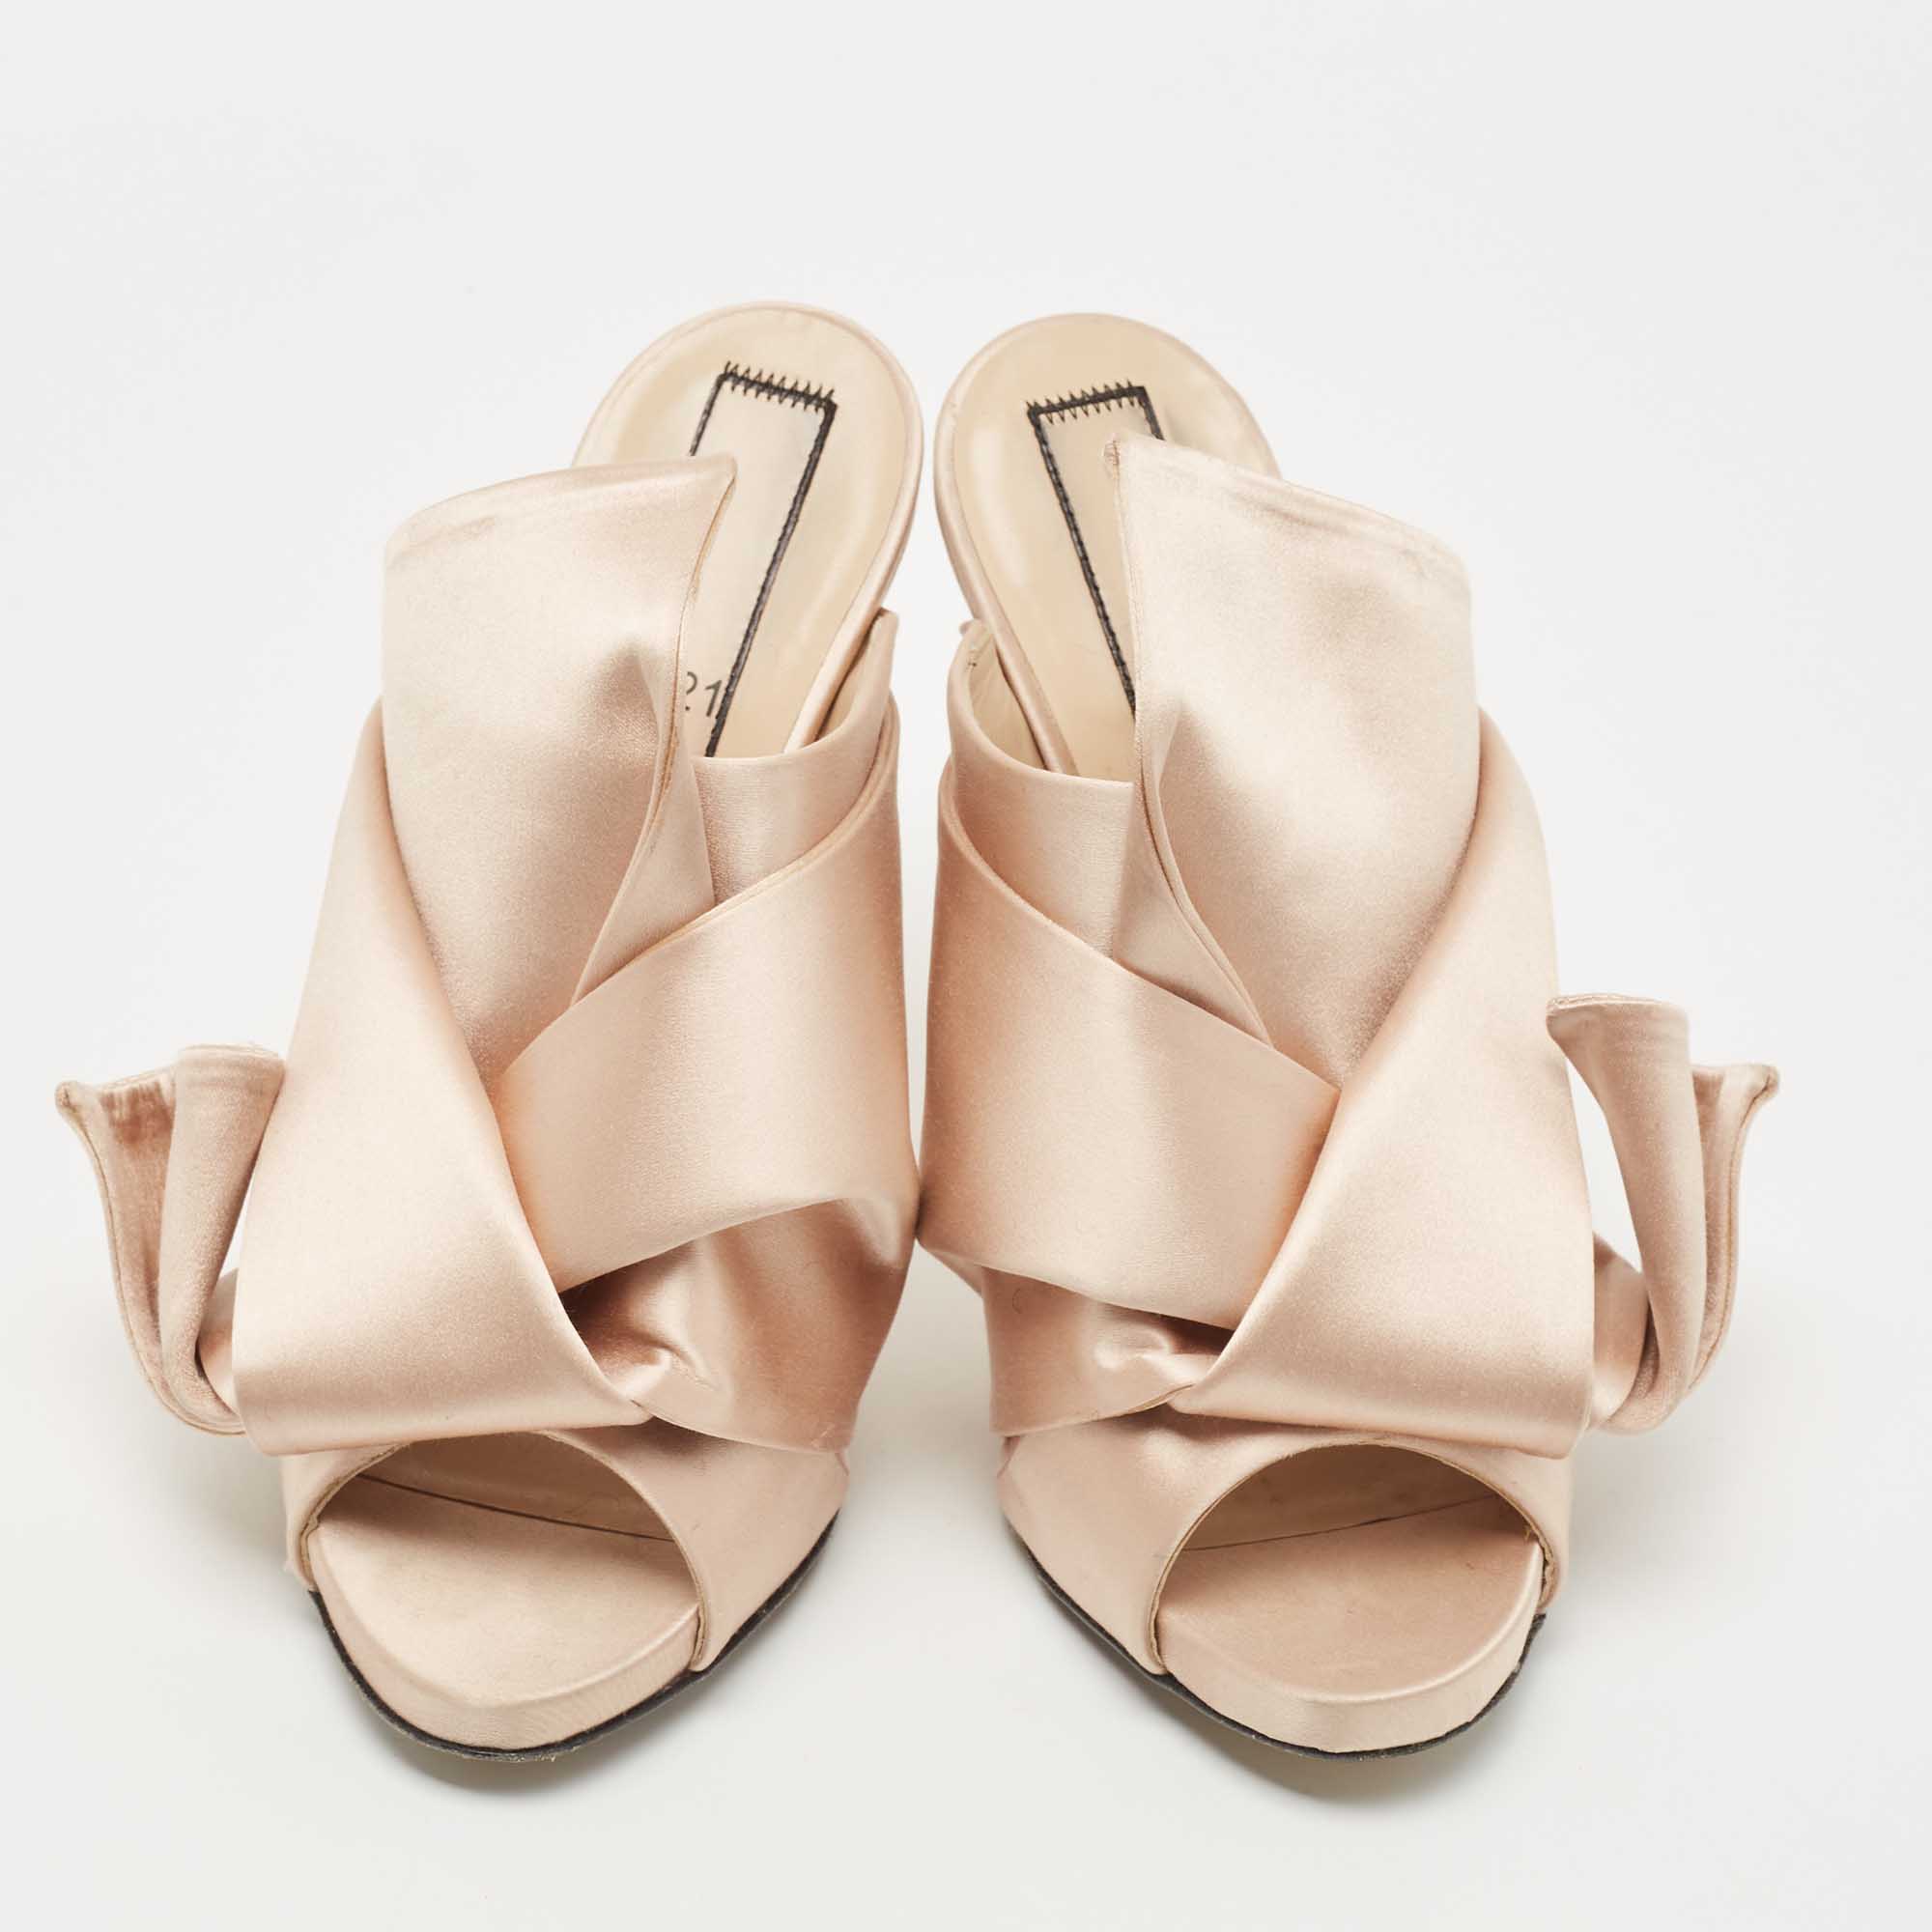 N21 Beige Satin Knot Mules Size 39